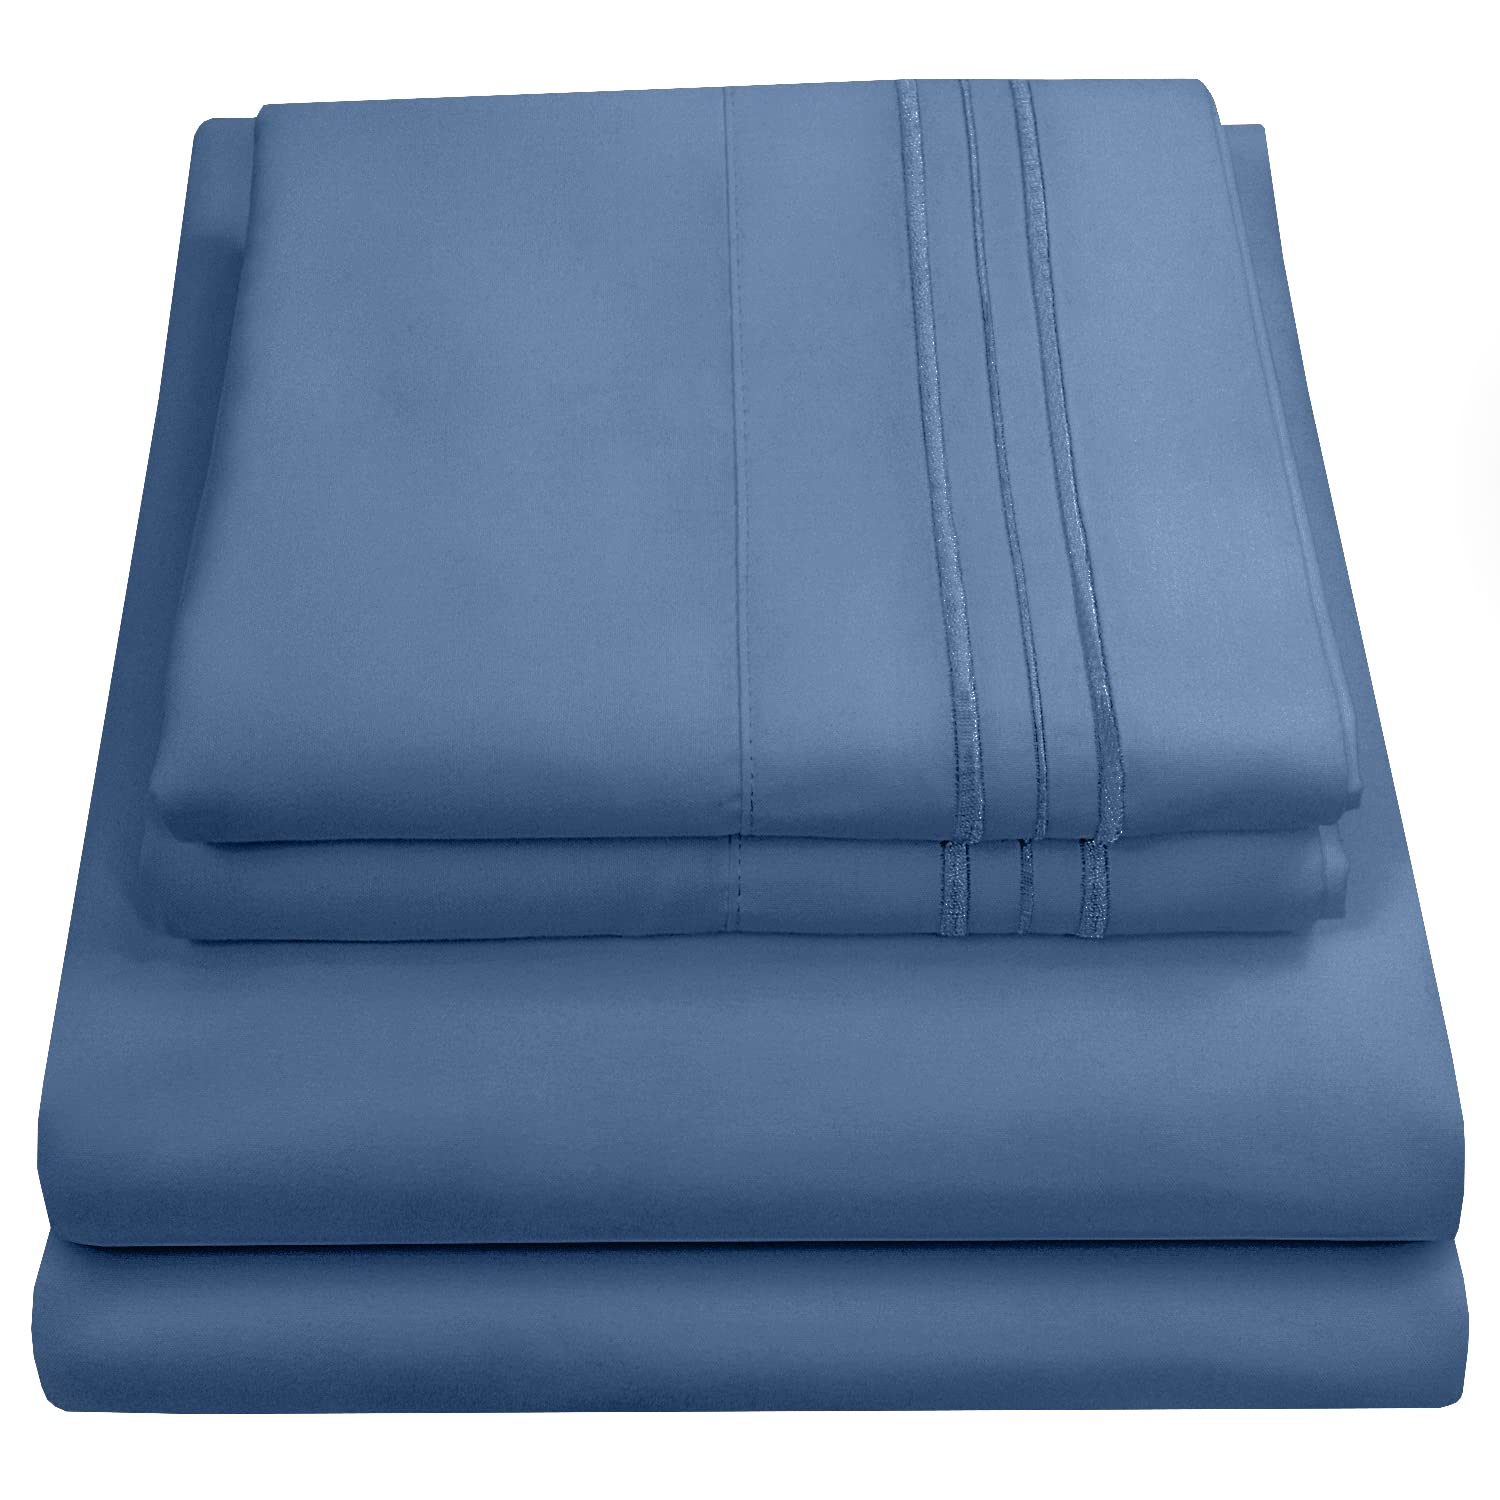 Book Cover King Size Sheets - Breathable Luxury Bed Sheets with Full Elastic & Secure Corner Straps Built In - 1800 Supreme Collection Extra Soft Deep Pocket Bedding Set, Sheet Set, King, Denim Denim King Sheet Set